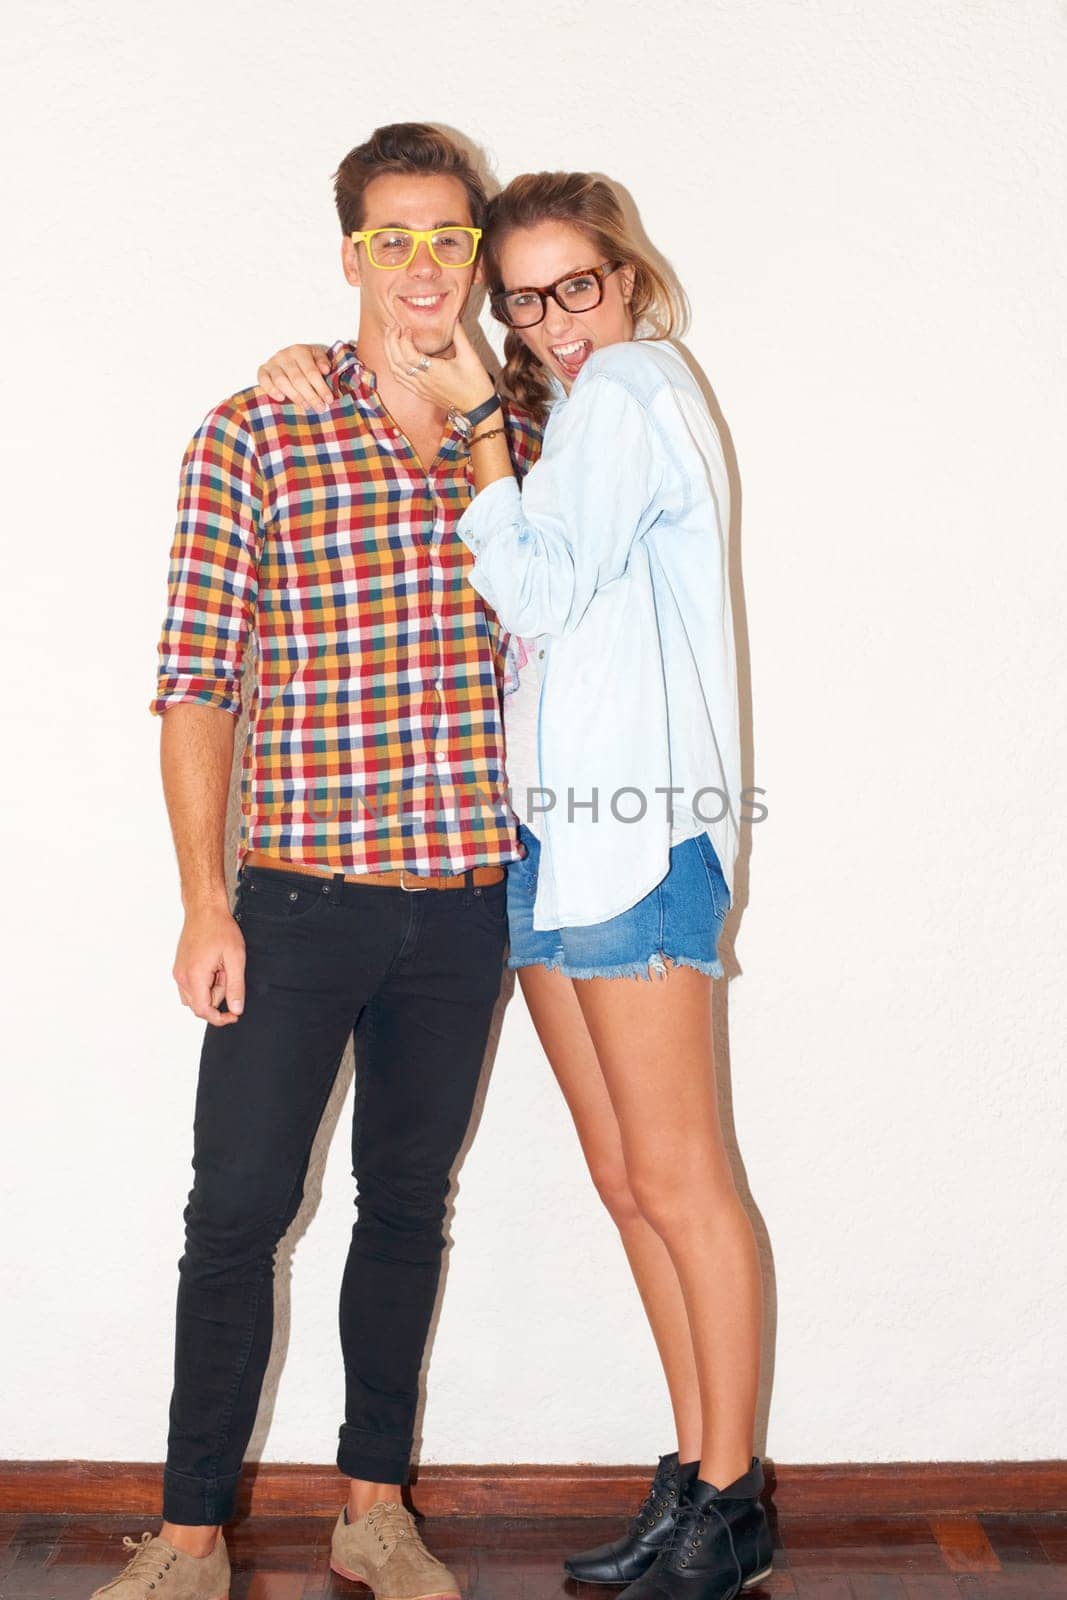 Goofy portrait of hipster couple, funny face with glasses and gen z fashion with university youth culture. Happiness, woman and man in crazy picture on fun college date with white wall background. by YuriArcurs